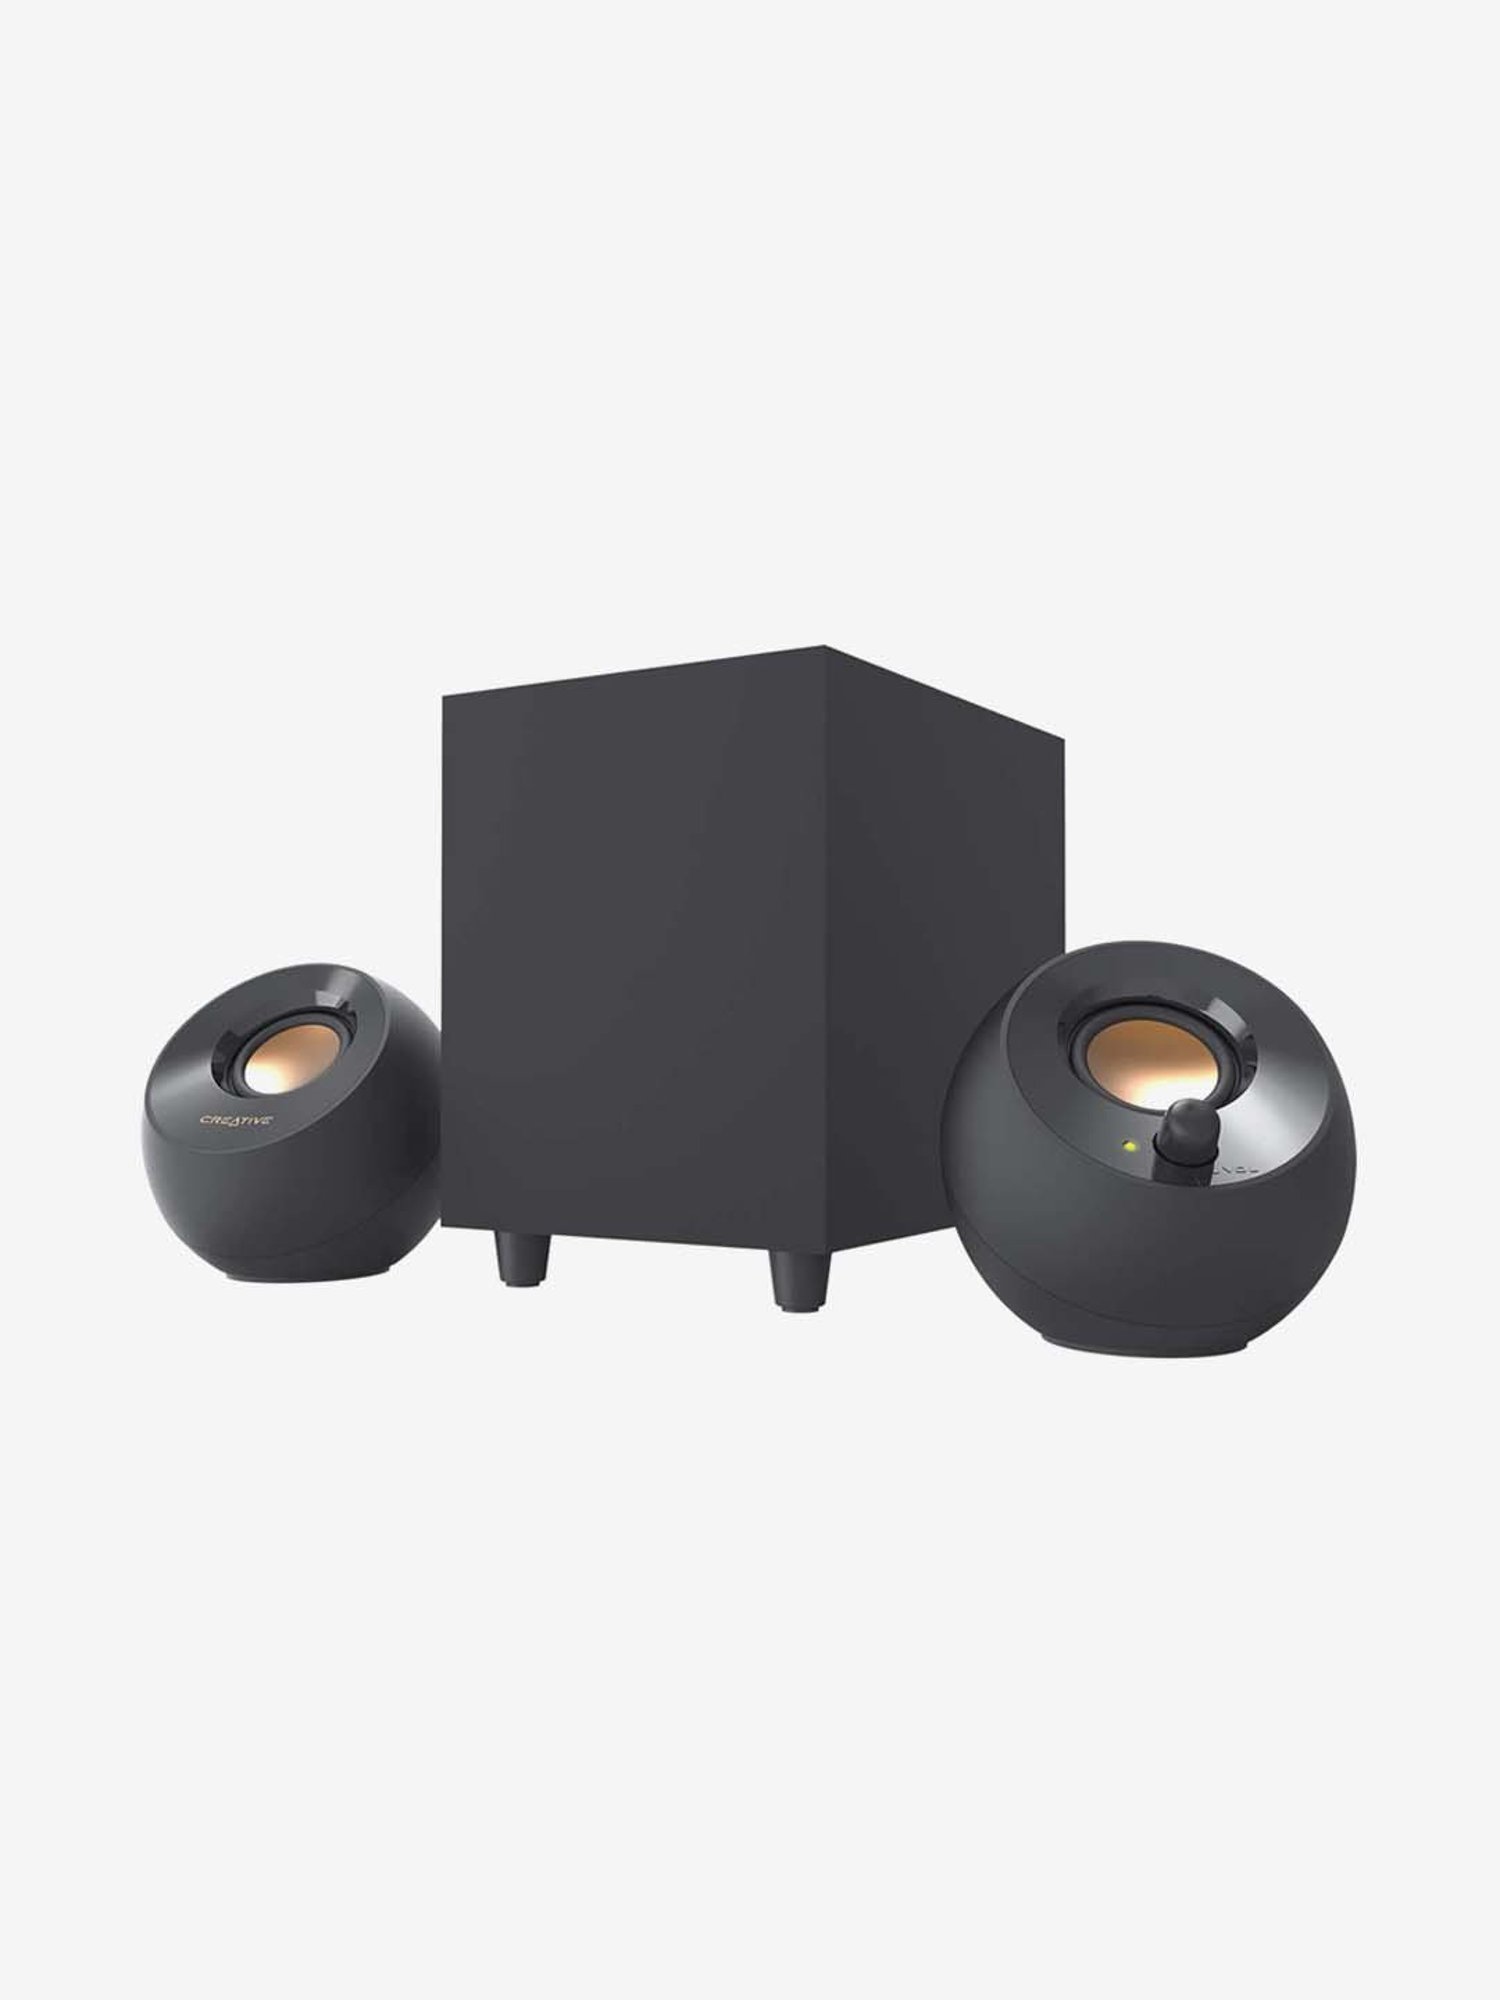 Buy Creative Pebble 2.0 USB-Powered Desktop Speakers with Far-Field Drivers  and Passive Radiators for PCs and Laptops Black - on Creative India Lowest  Price in India